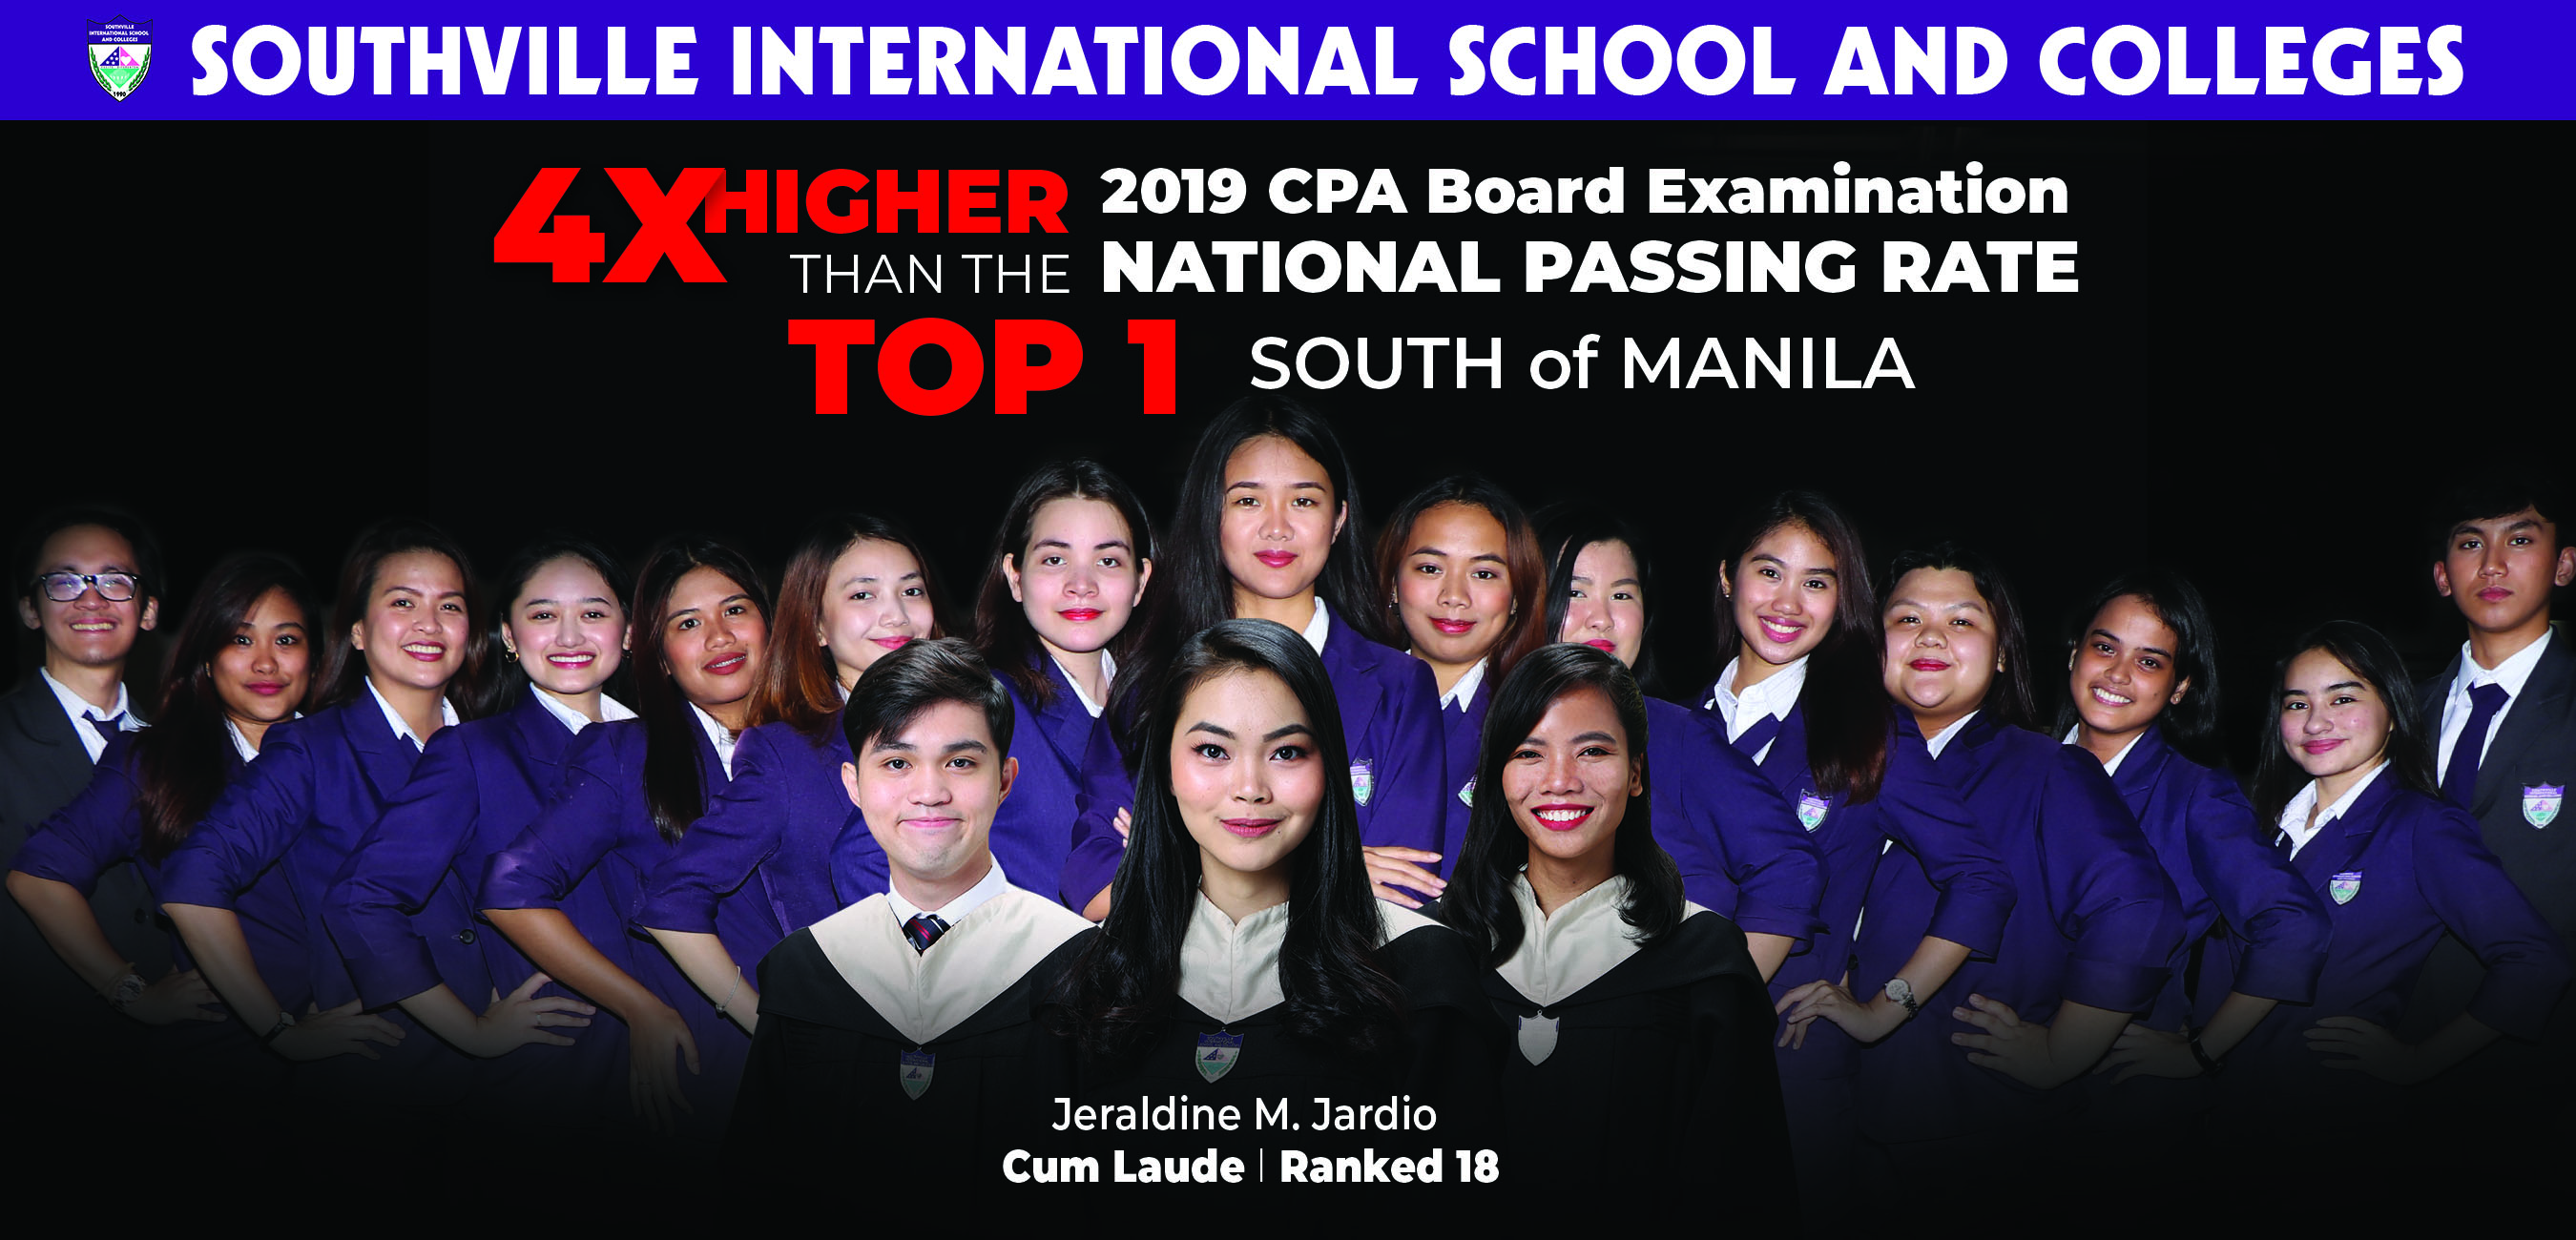 Southville OUTPERFORMS Schools in the South in CPA Boards